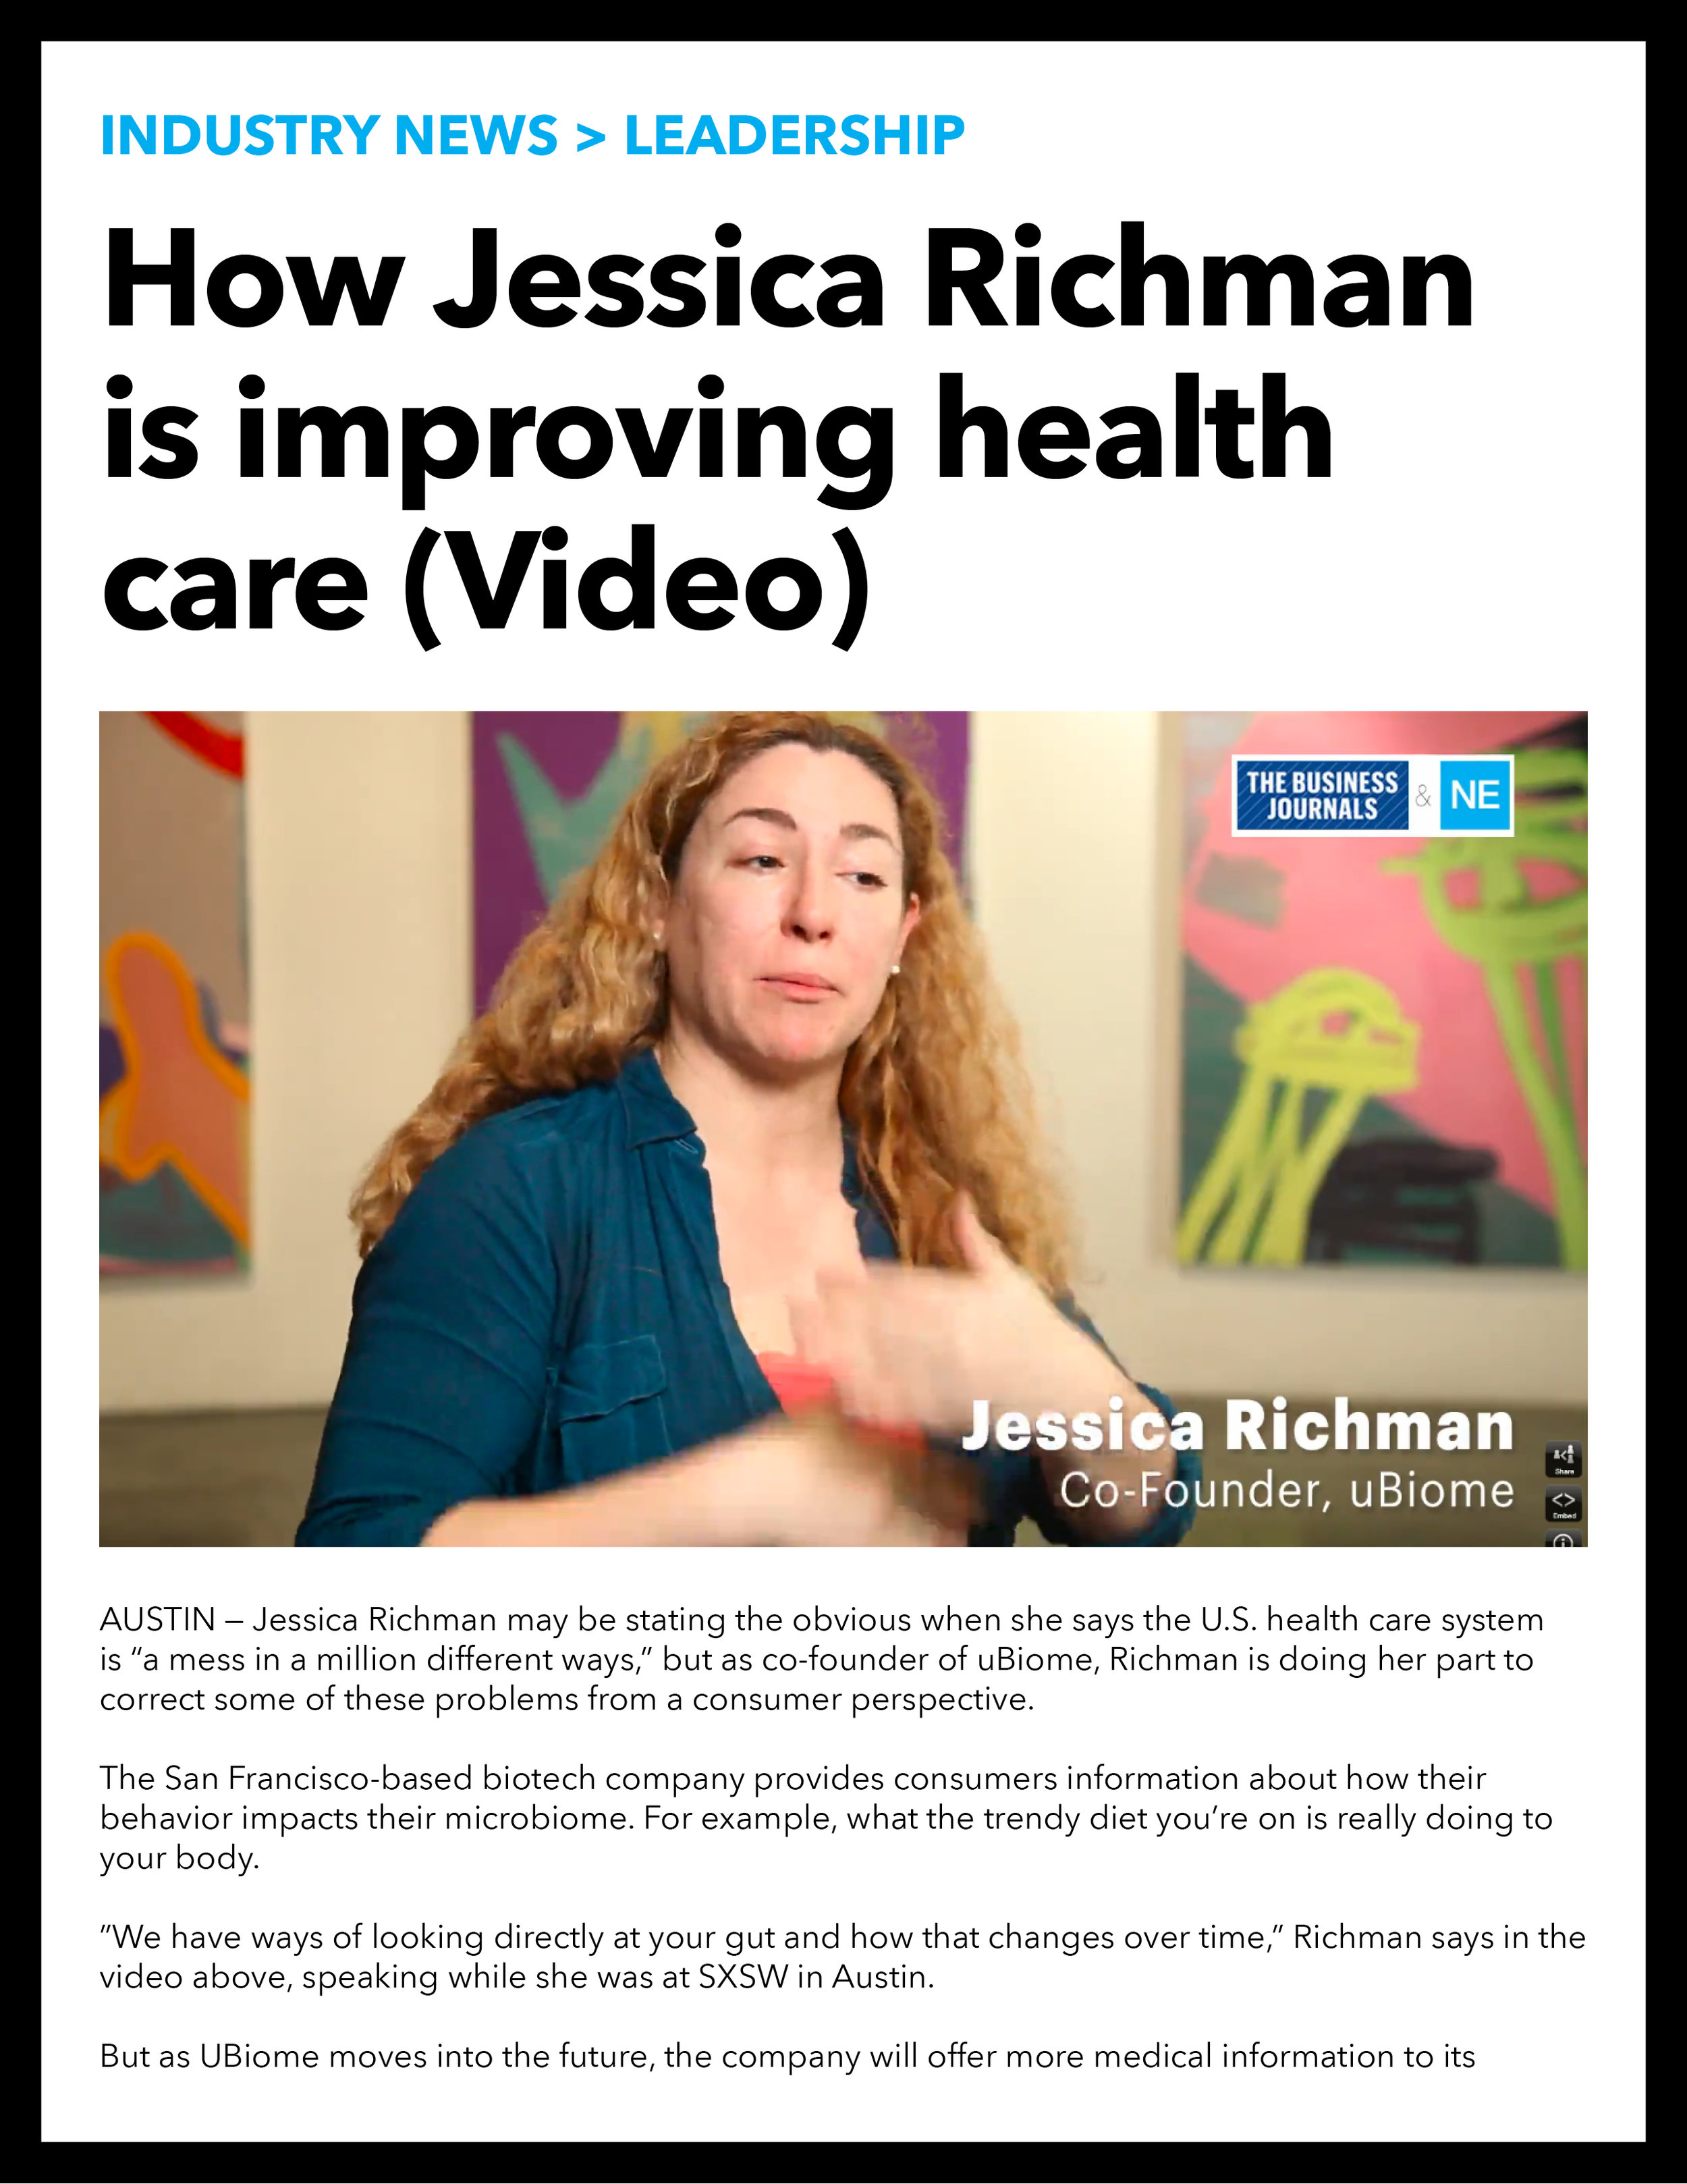 Jessica Richman, CEO of uBiome